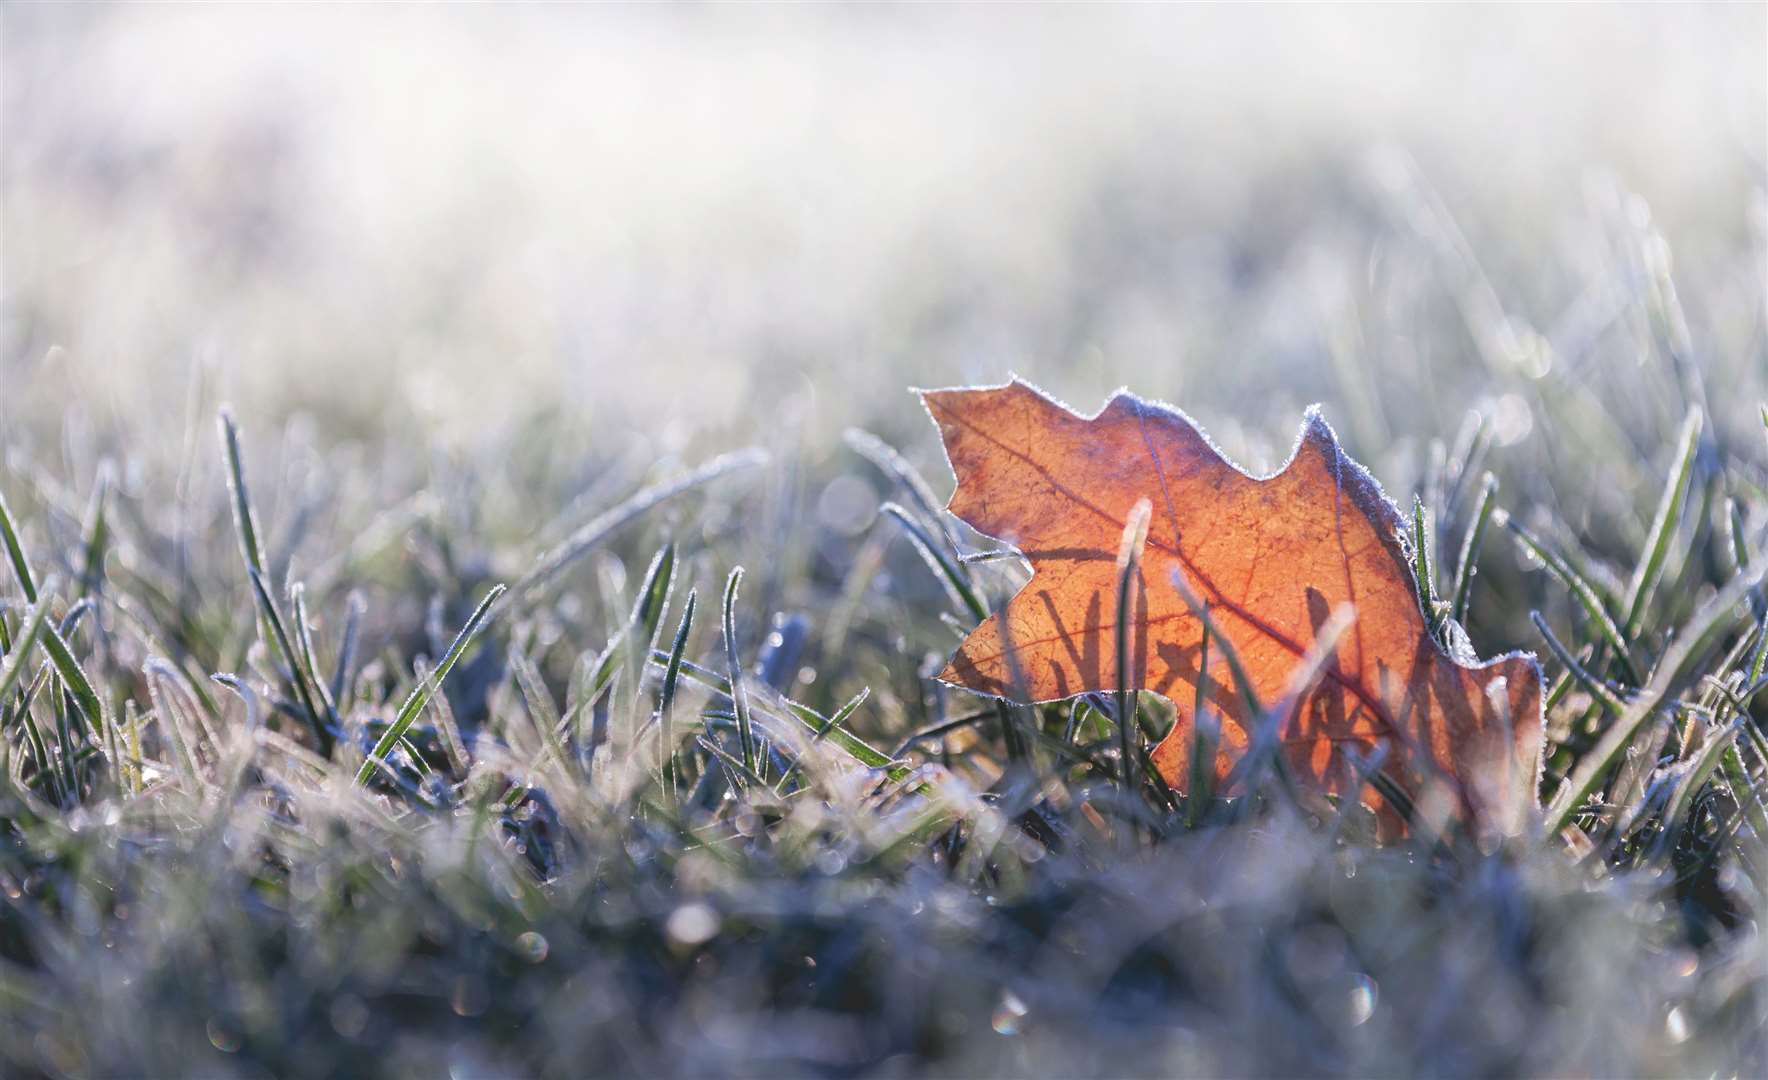 The Met Office is forecasting wintry weather ahead. Image: iStock.